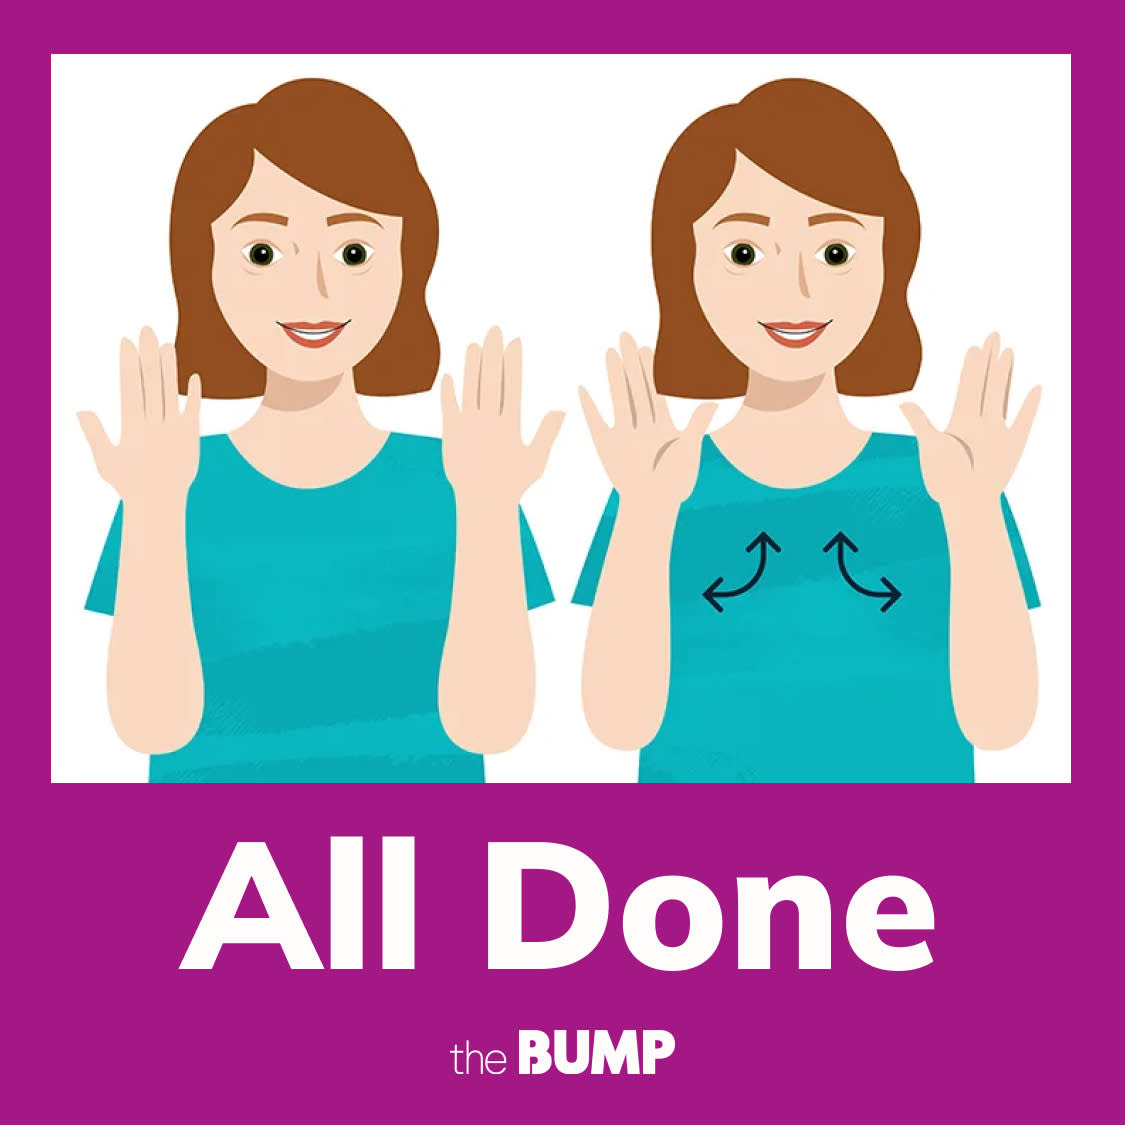 all gone sign language